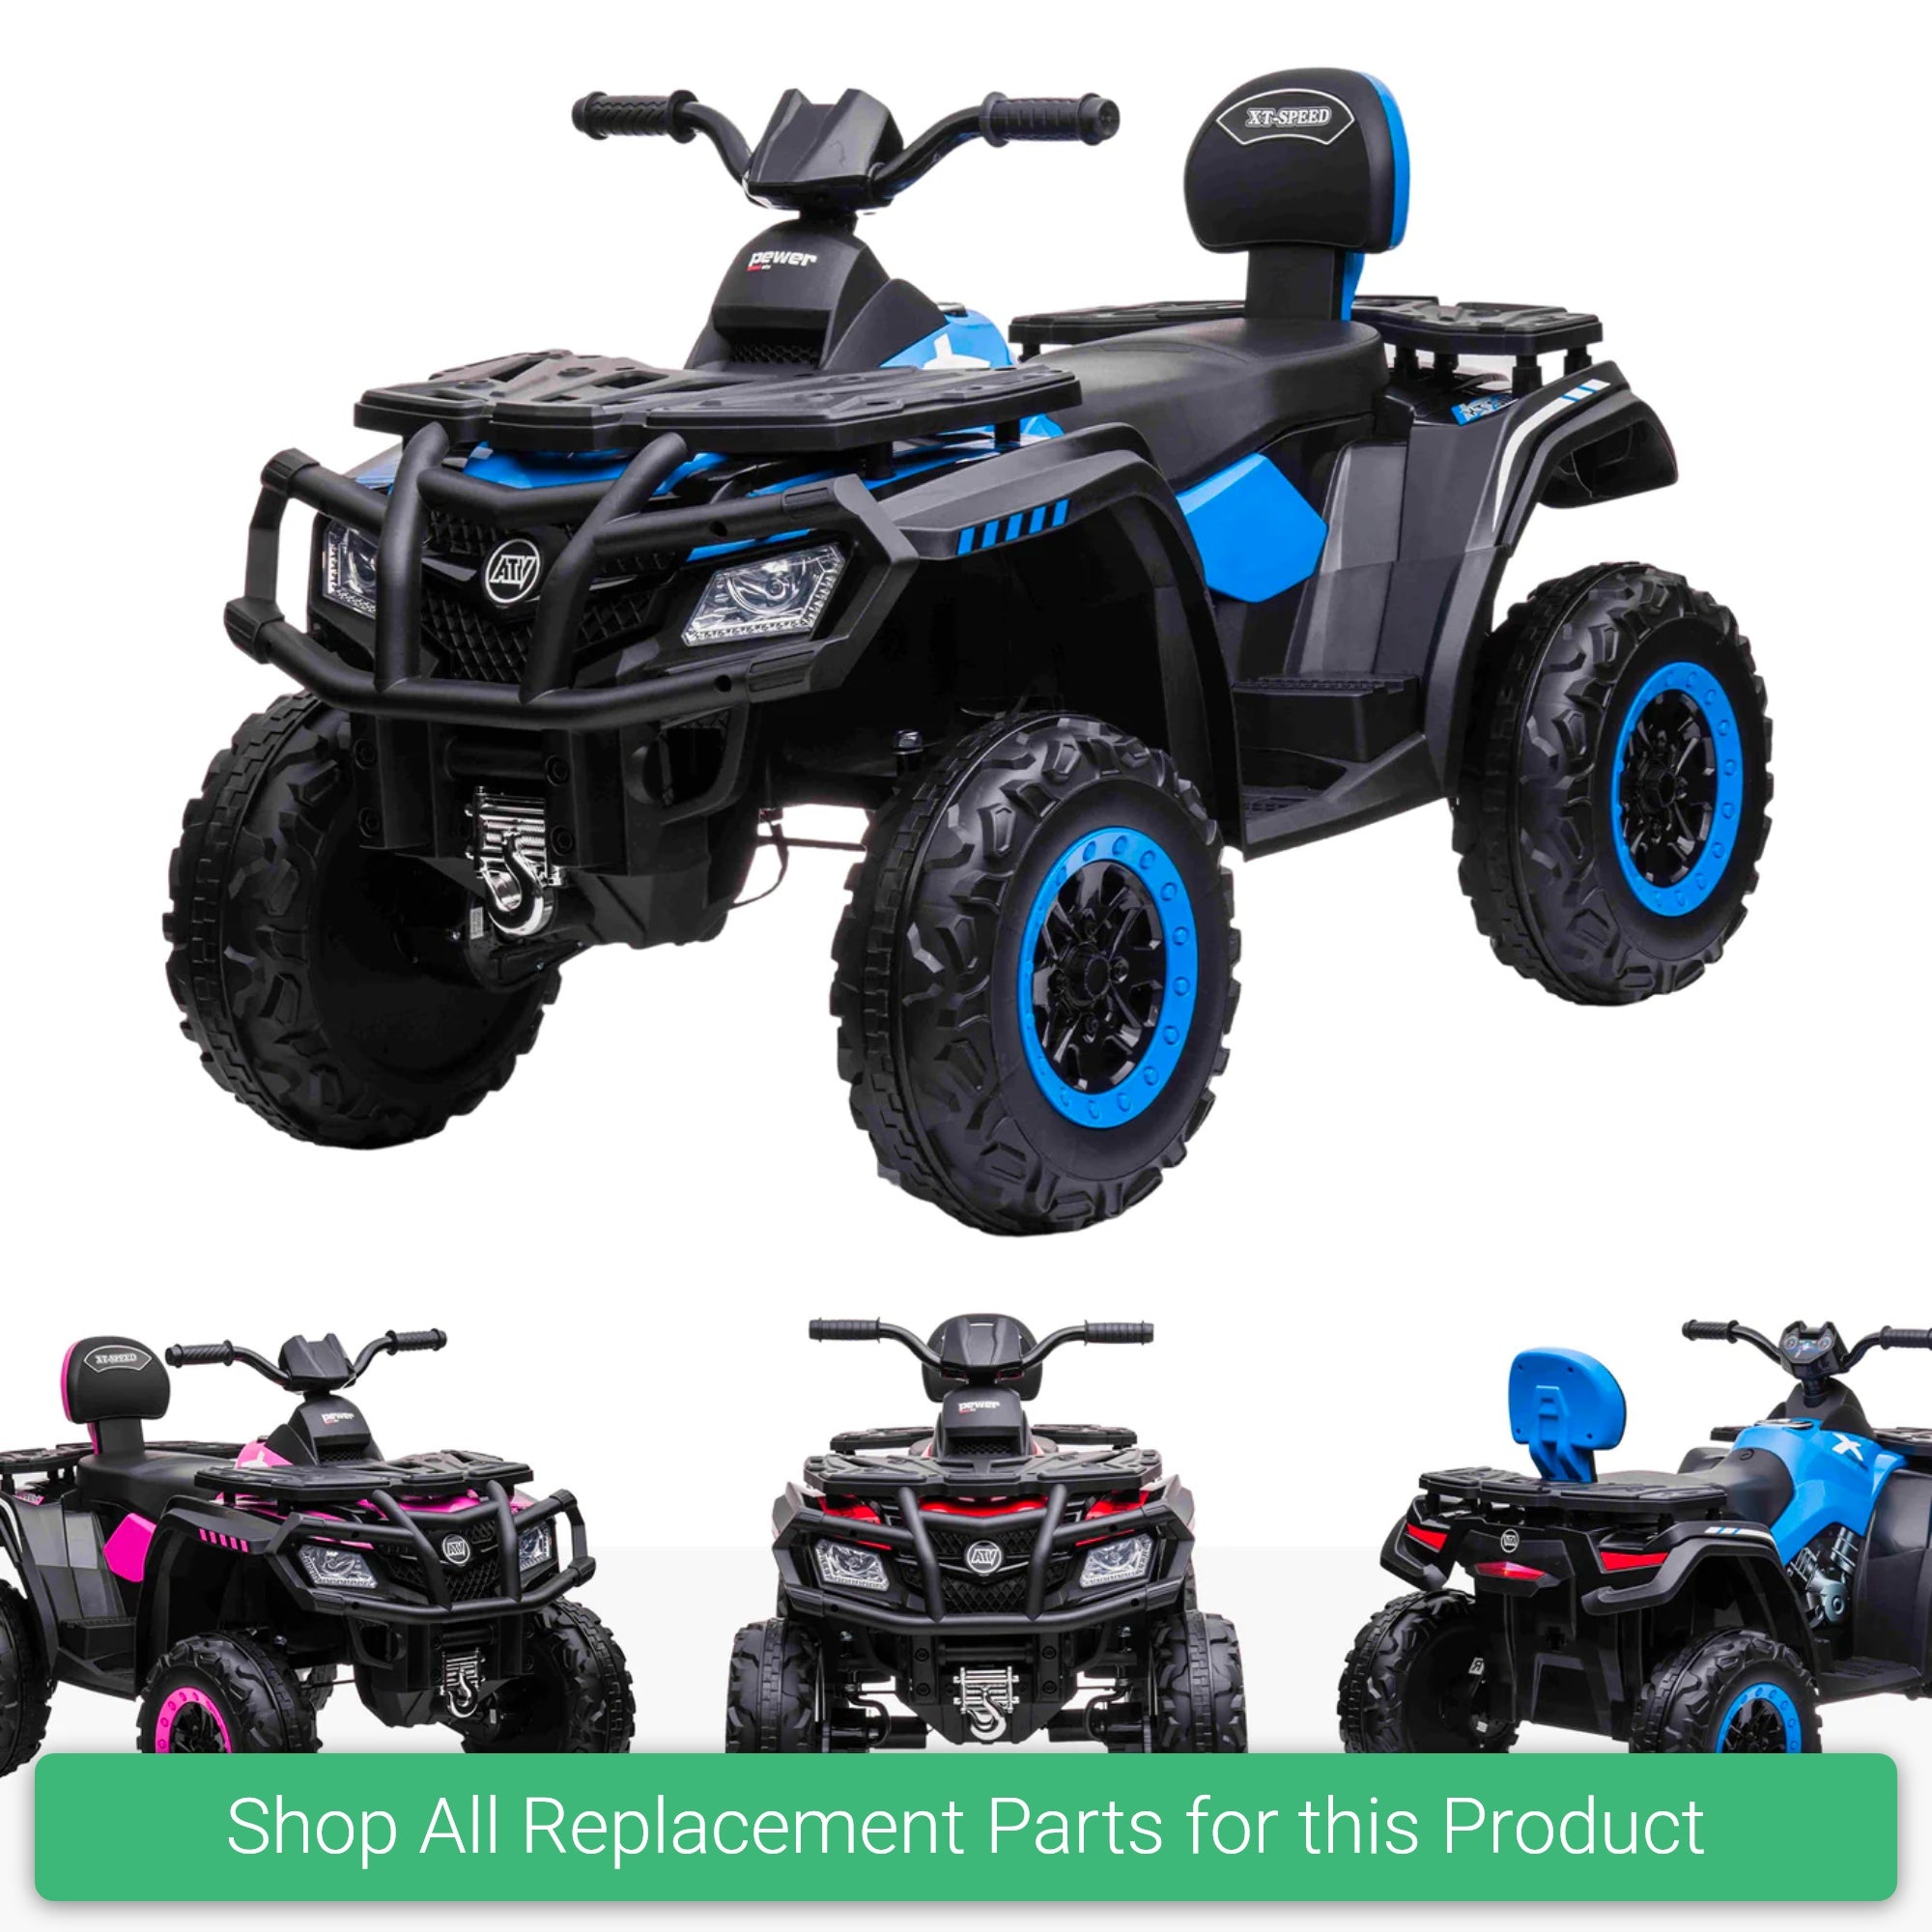 Replacement Parts and Spares for Kids 24v ATV QUAD Fortress - ATV-24-VARI - S615